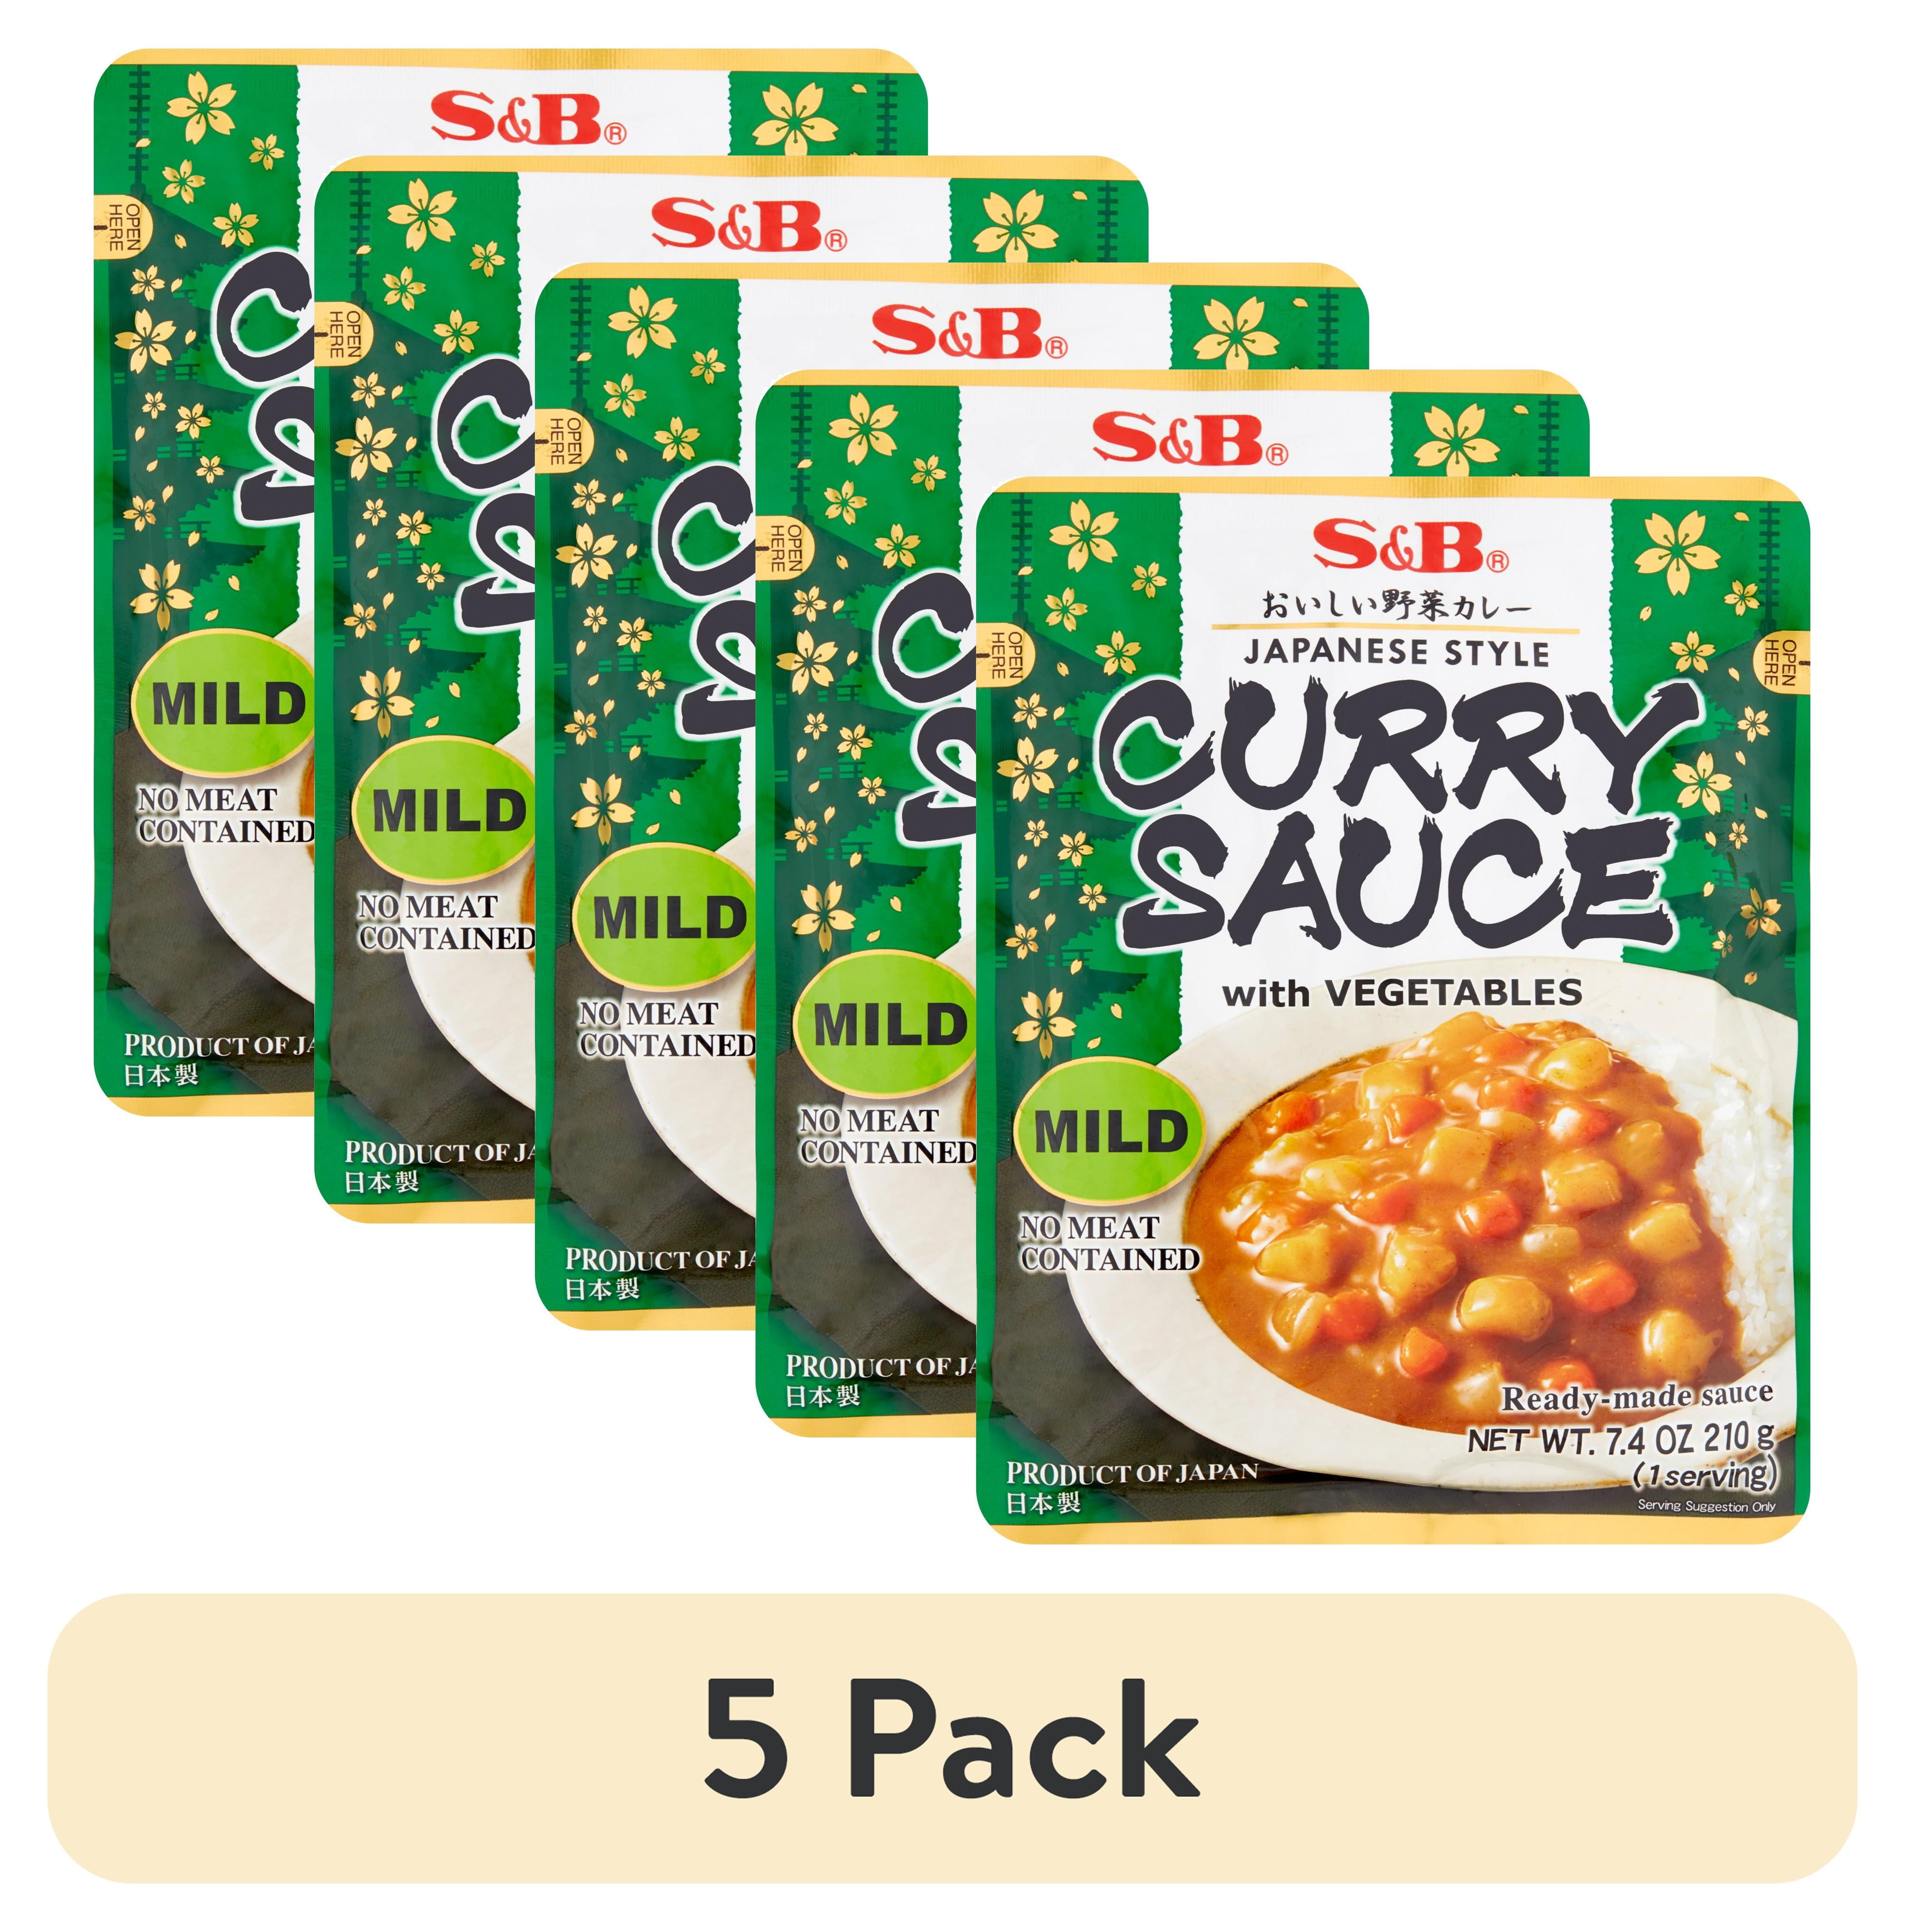 5 pack) S&B Japanese Style Curry Sauce RETORT, Mil with Vegetables, 7.4 Oz